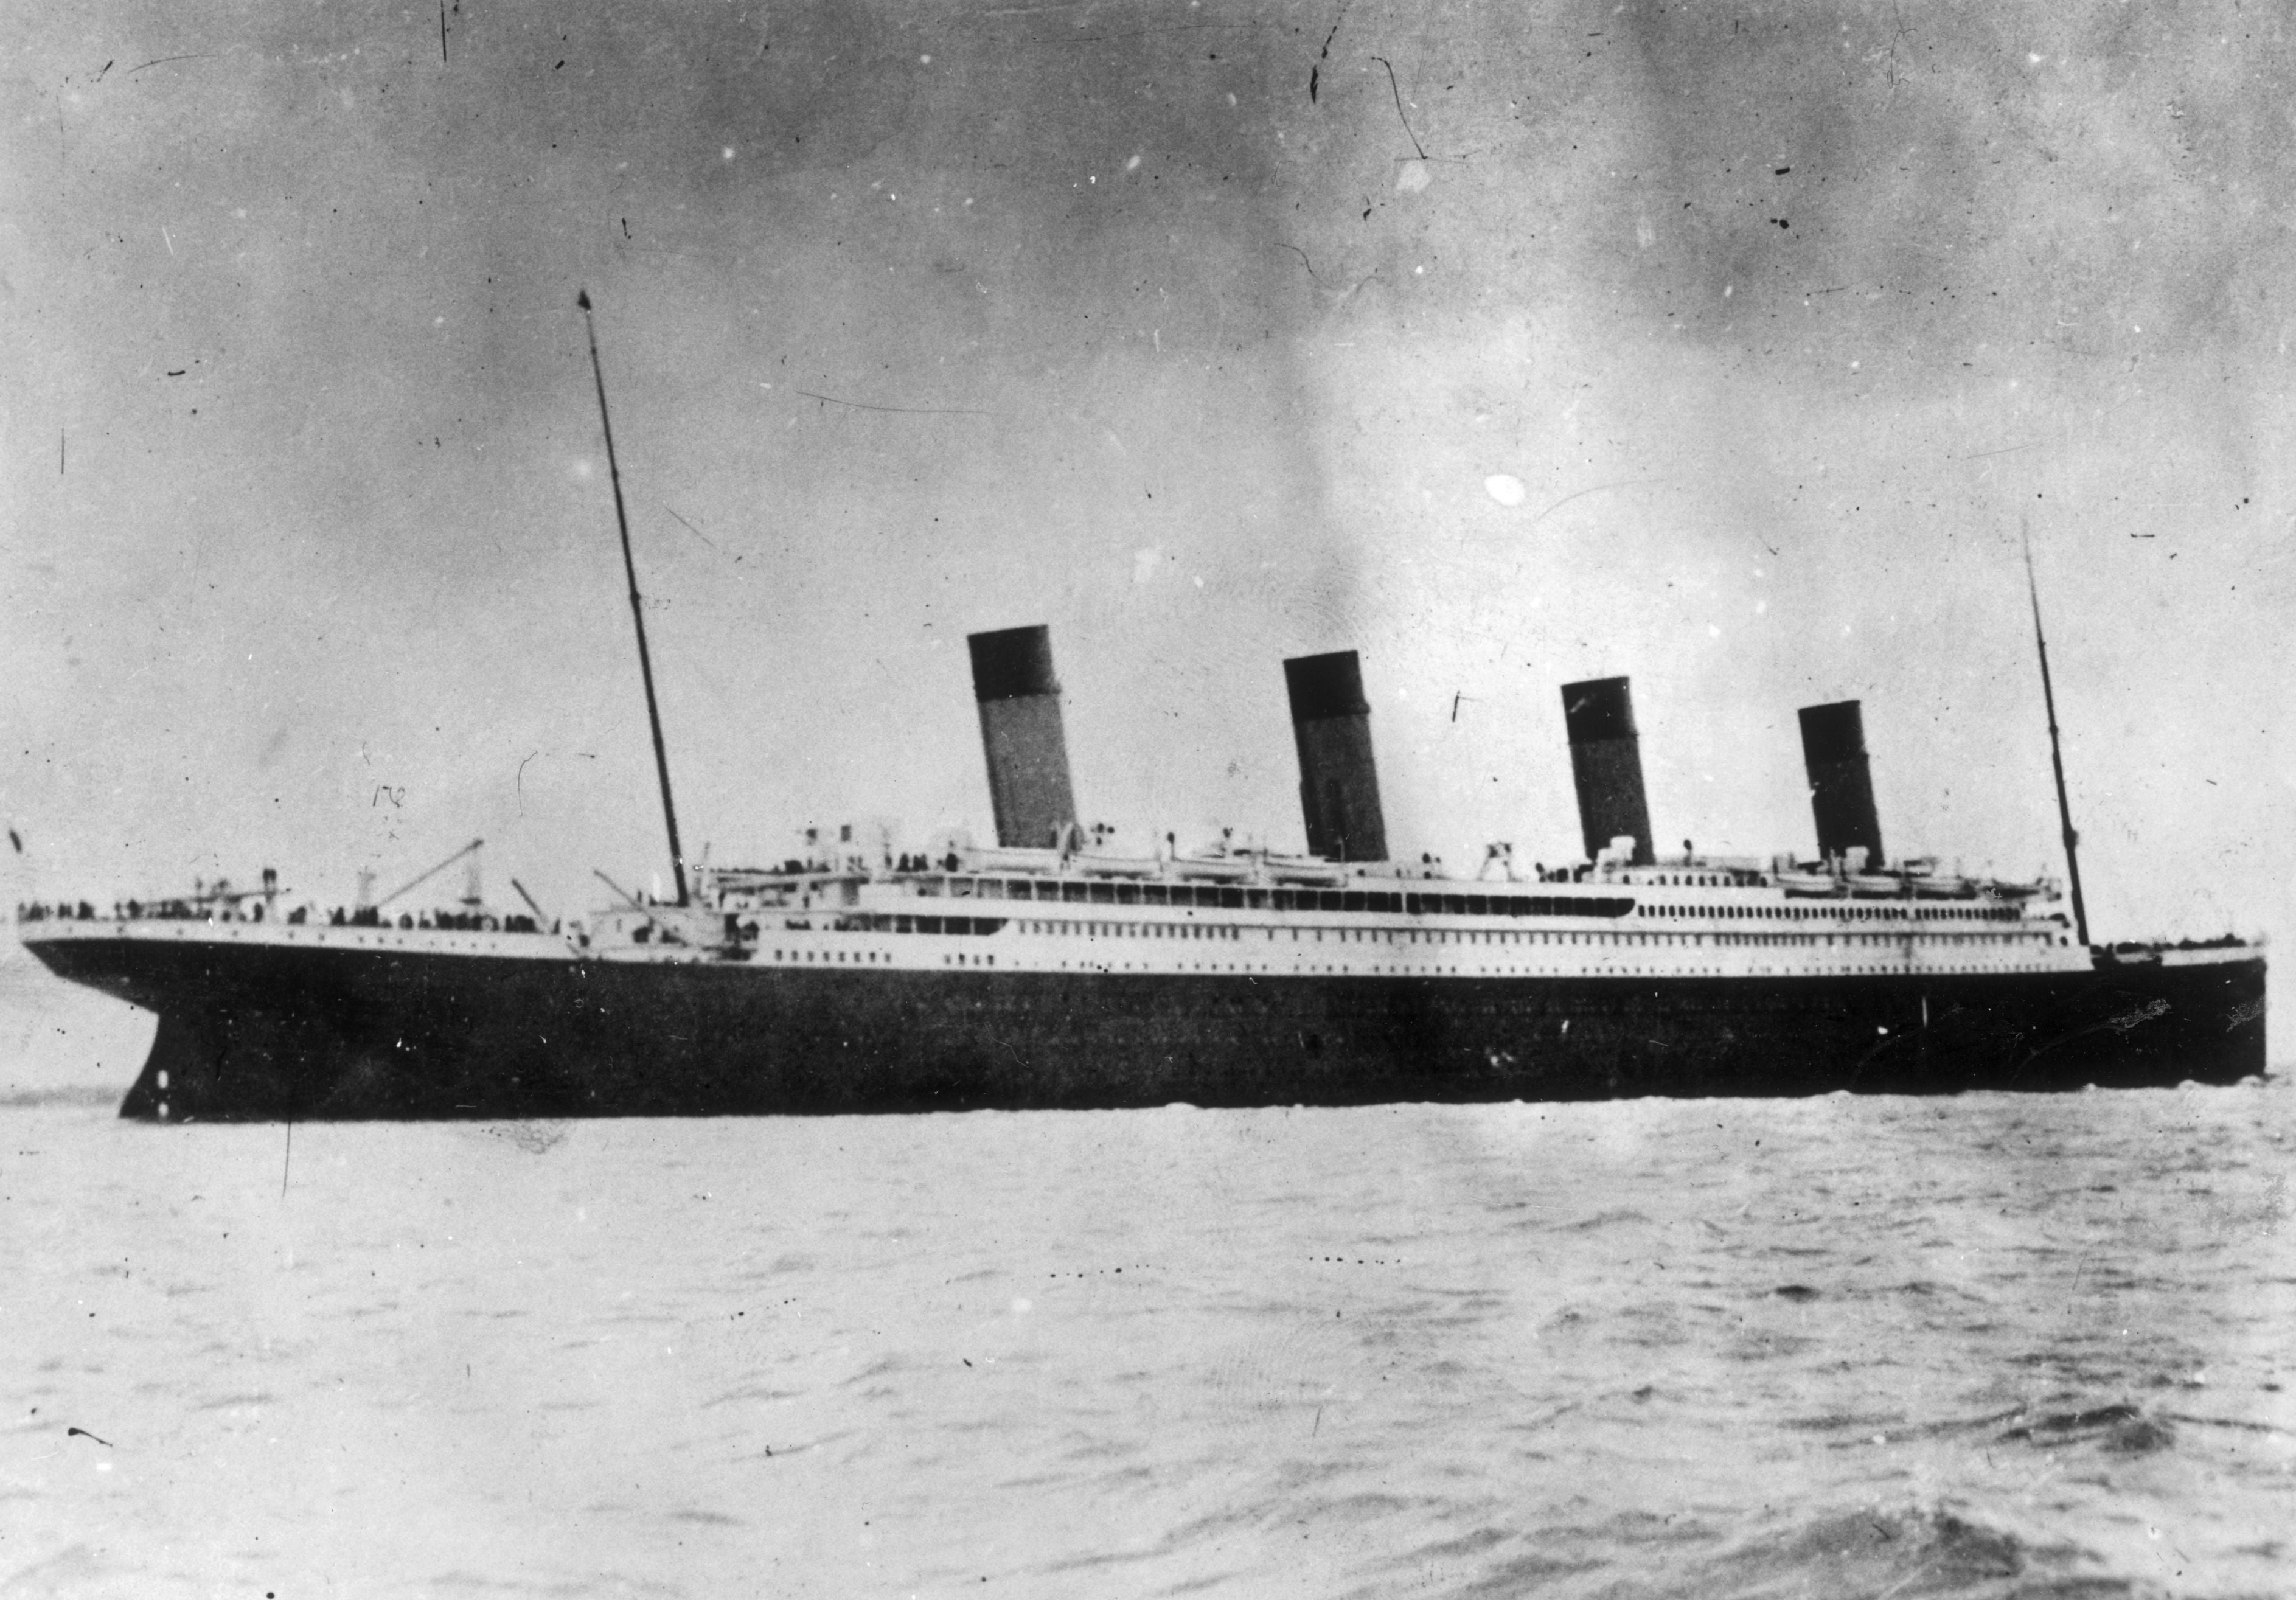 The ill-fated White Star liner RMS Titanic, which struck an iceberg and sank on her maiden voyage across the Atlantic